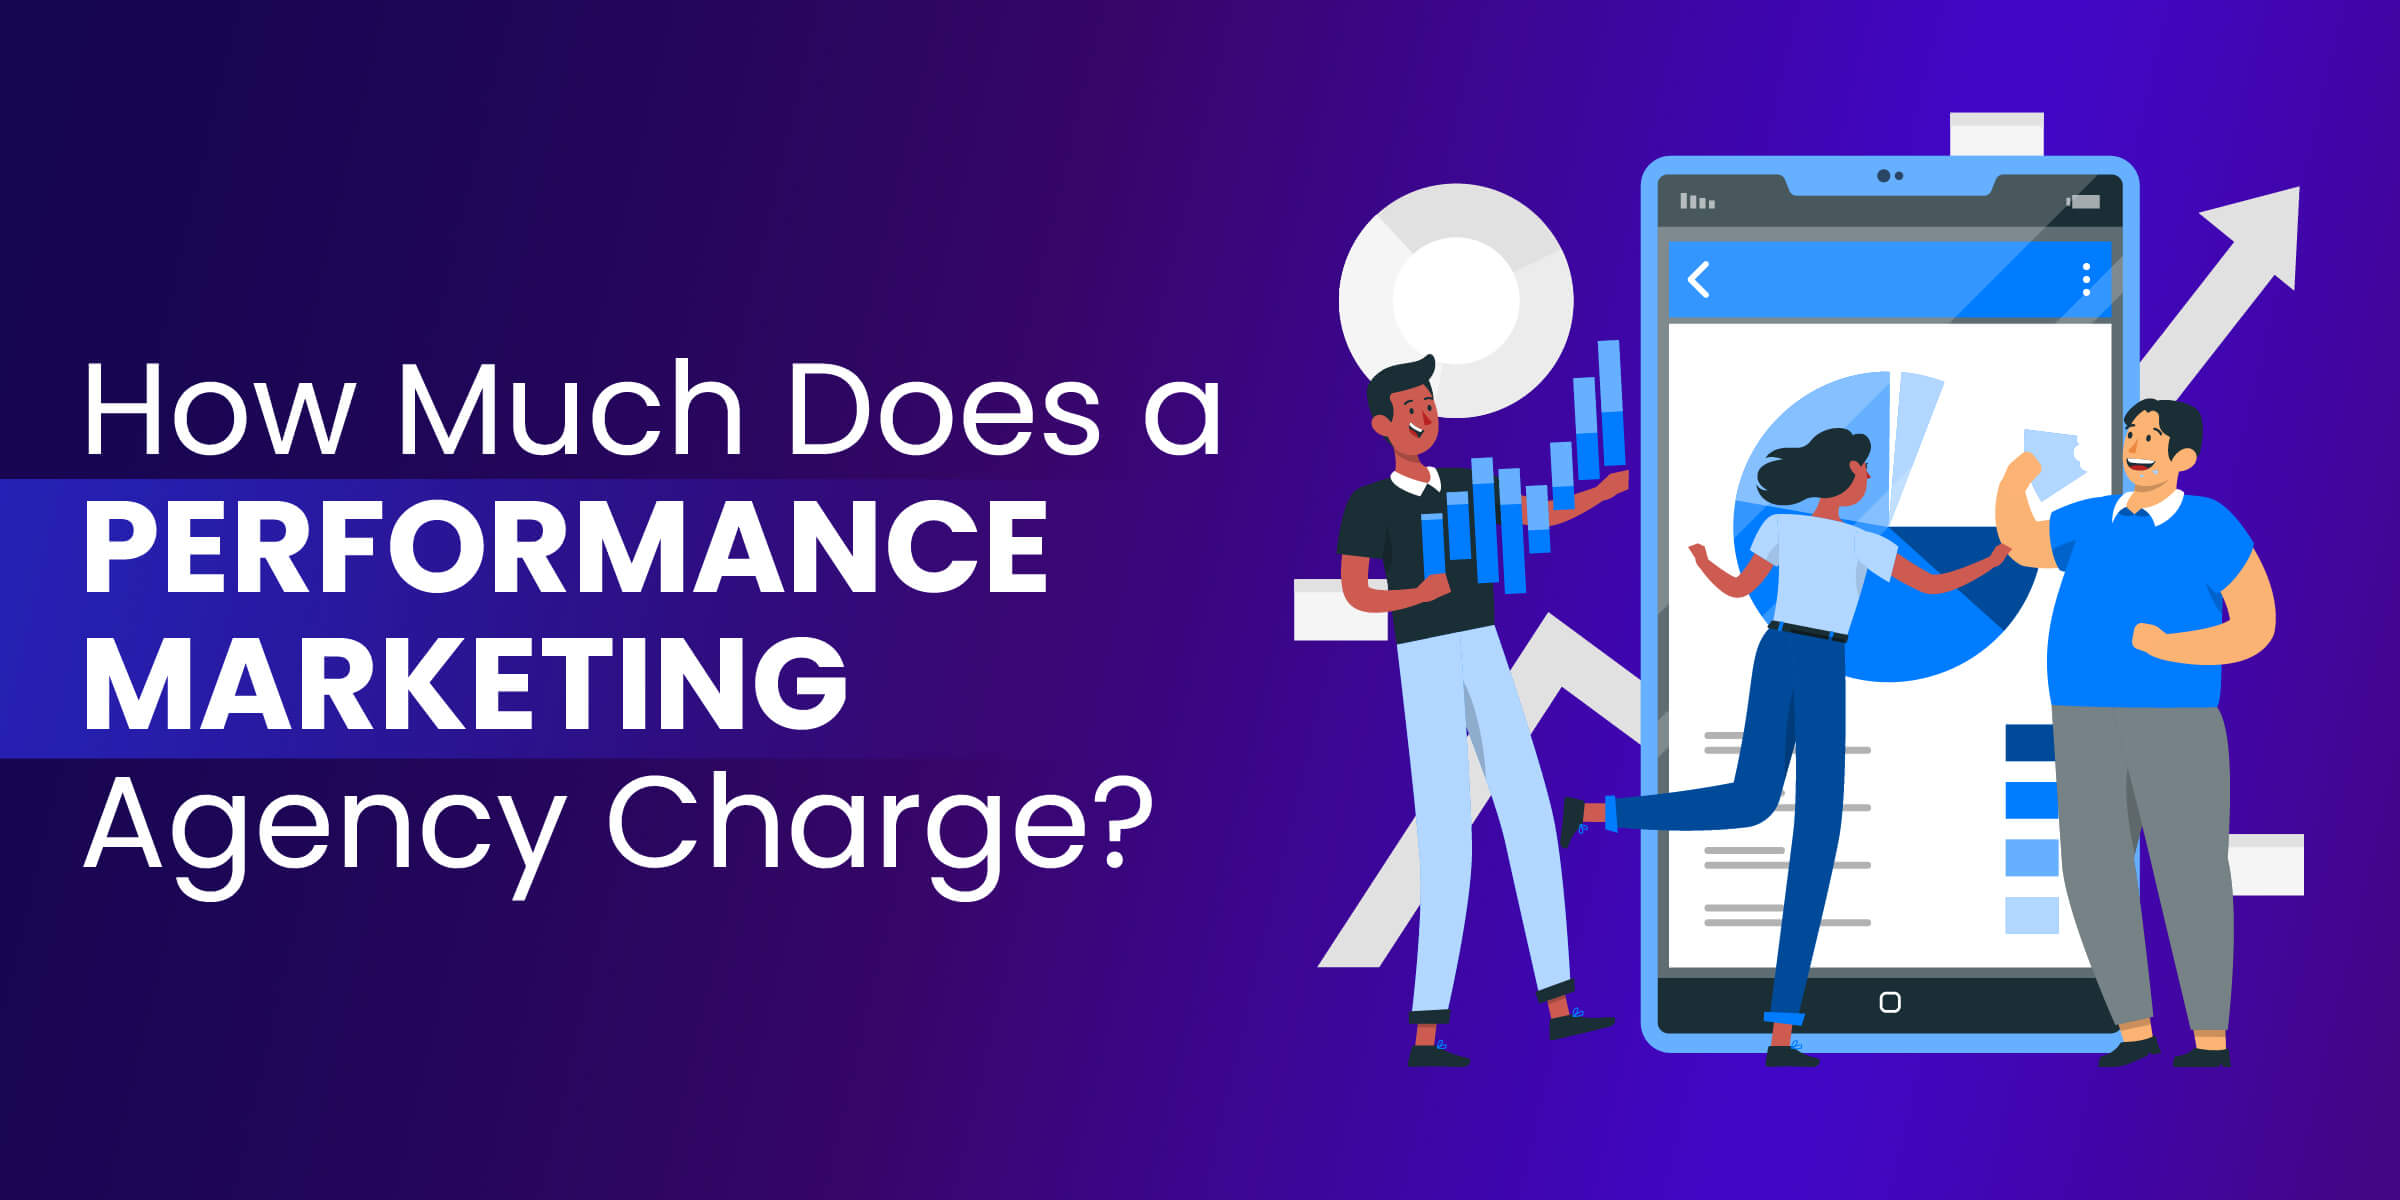 How Much Does Performance Marketing Agency Charge